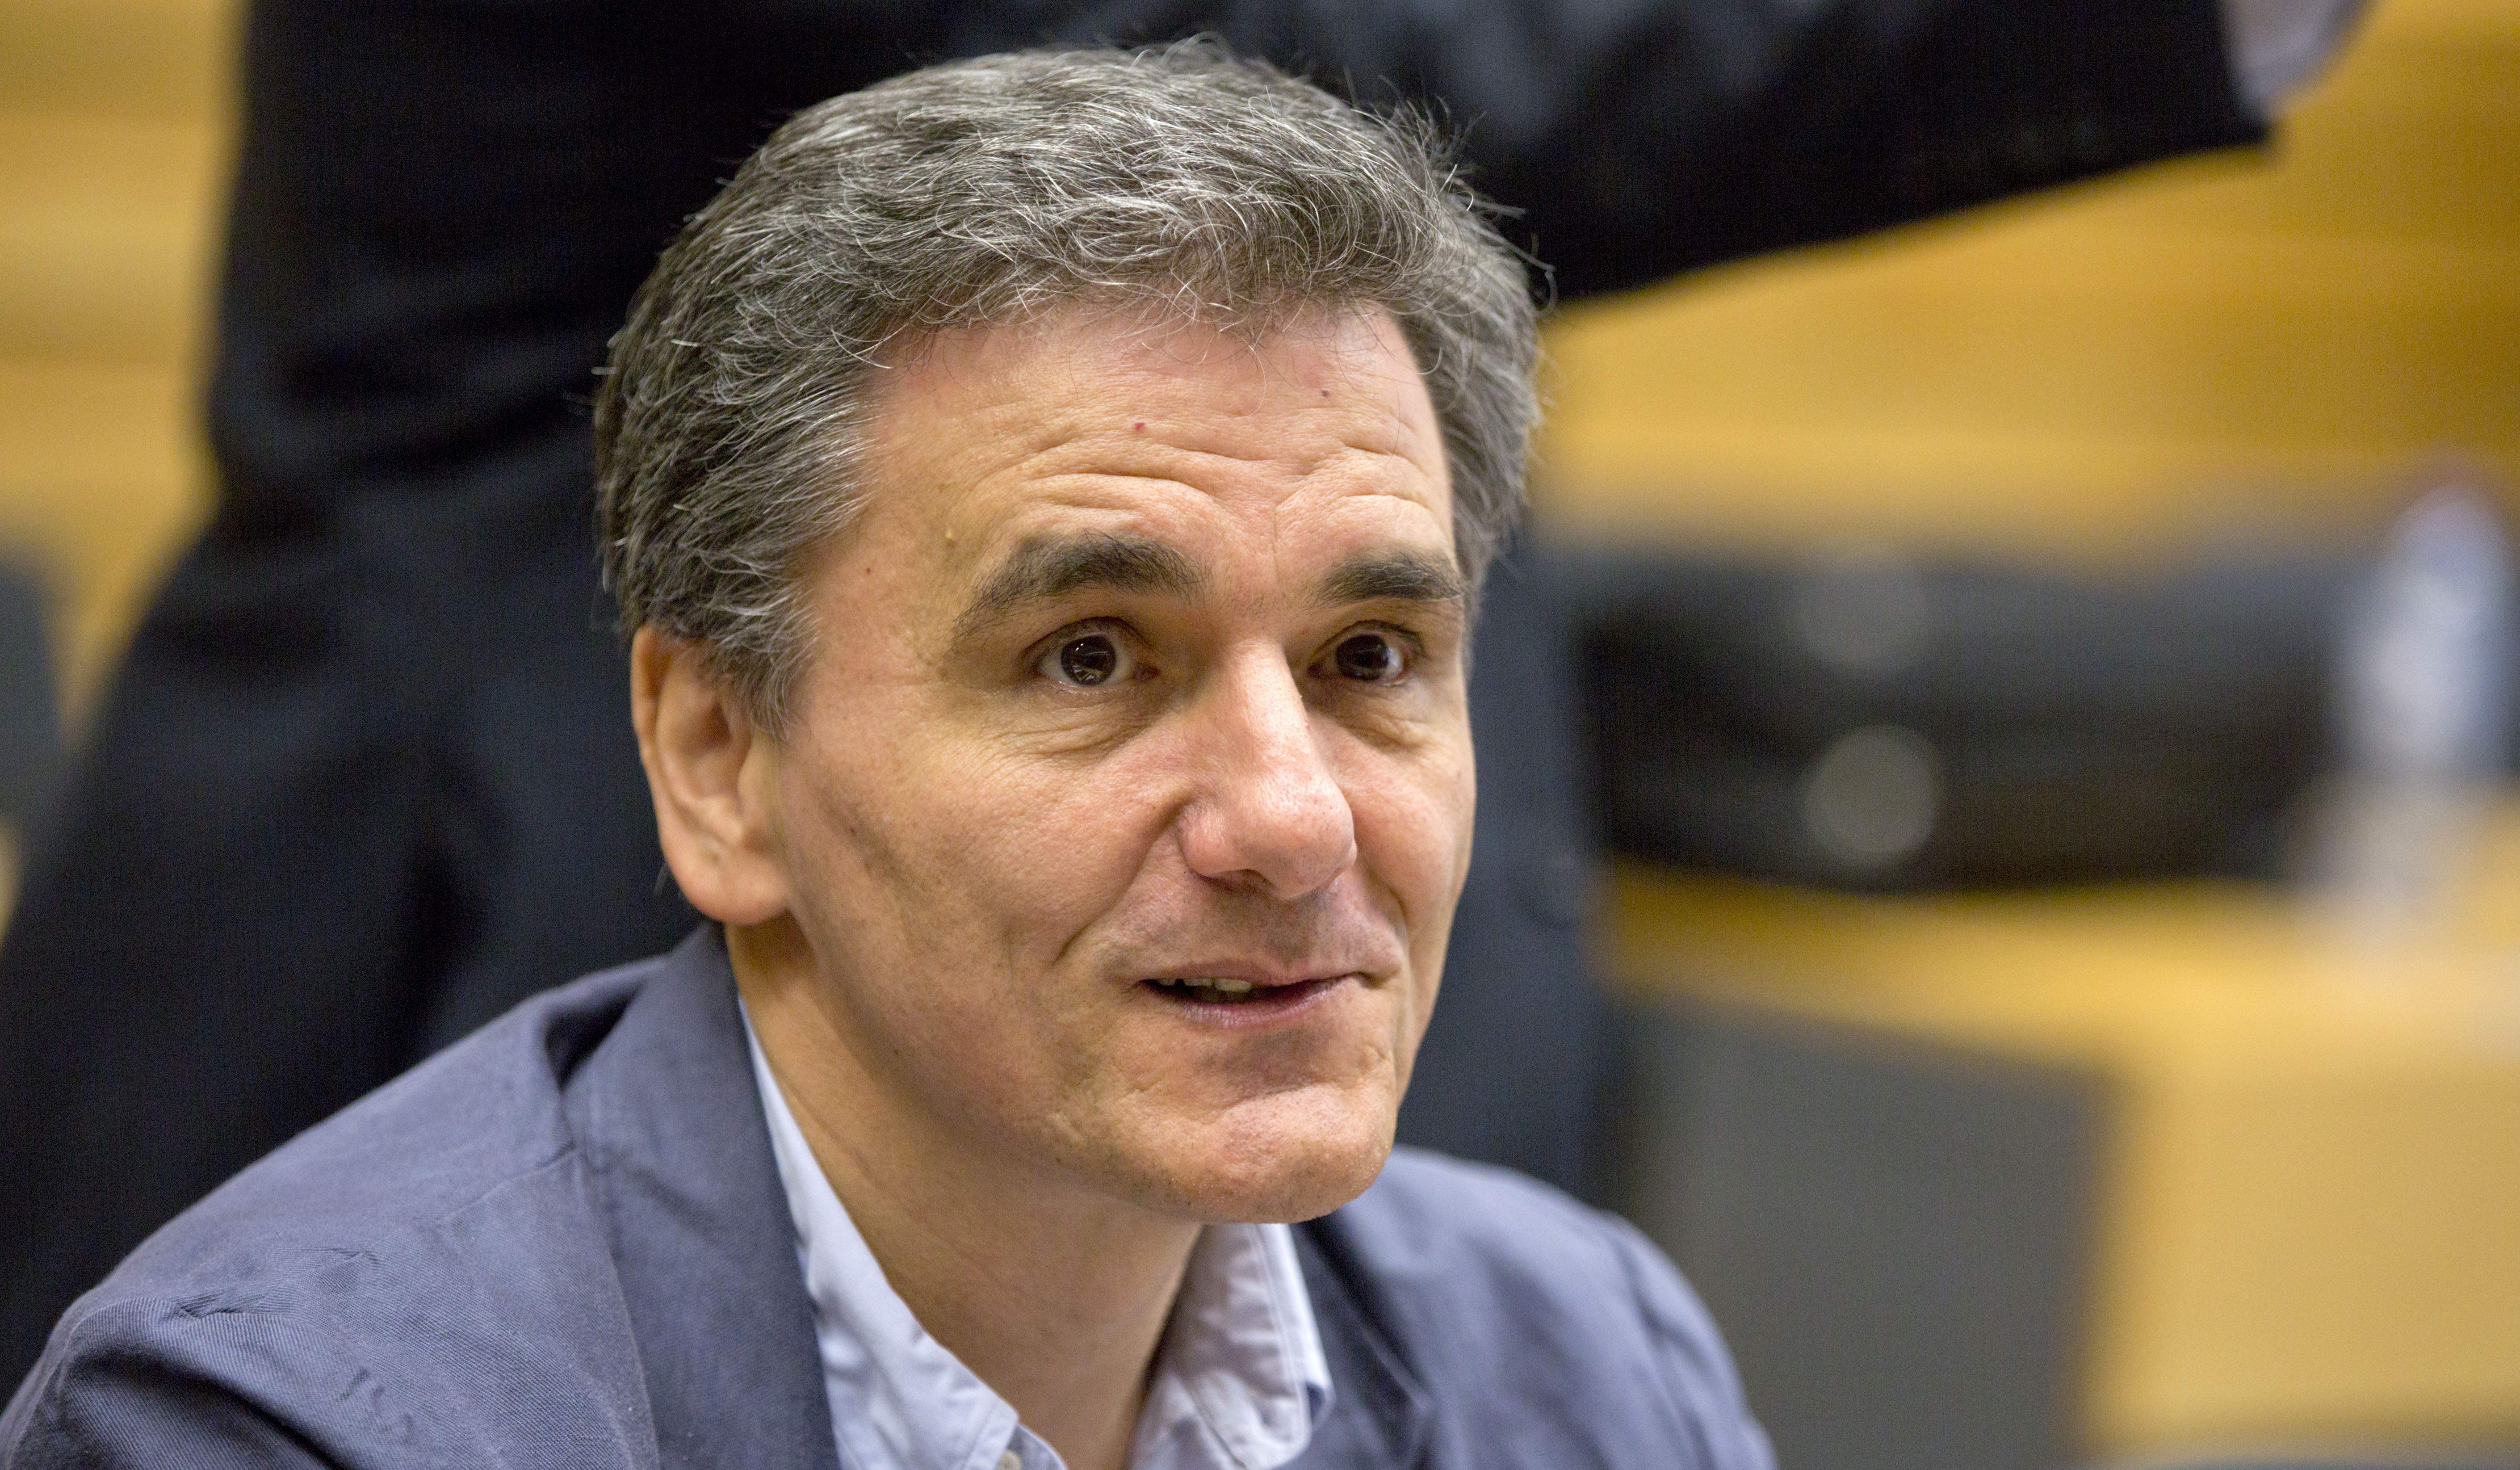 Greek Finance Minister Euclid Tsakalotos waits for the start of a round table meeting of eurozone finance ministers at the EU LEX building in Brussels on Tuesday, July 7, 2015. Greek Prime Minister Alexis Tsipras was heading Tuesday to Brussels for an emergency meeting of eurozone leaders, where he will try to use a resounding referendum victory to eke out concessions from European creditors over a bailout for the crisis-ridden country. (AP Photo/Virginia Mayo)